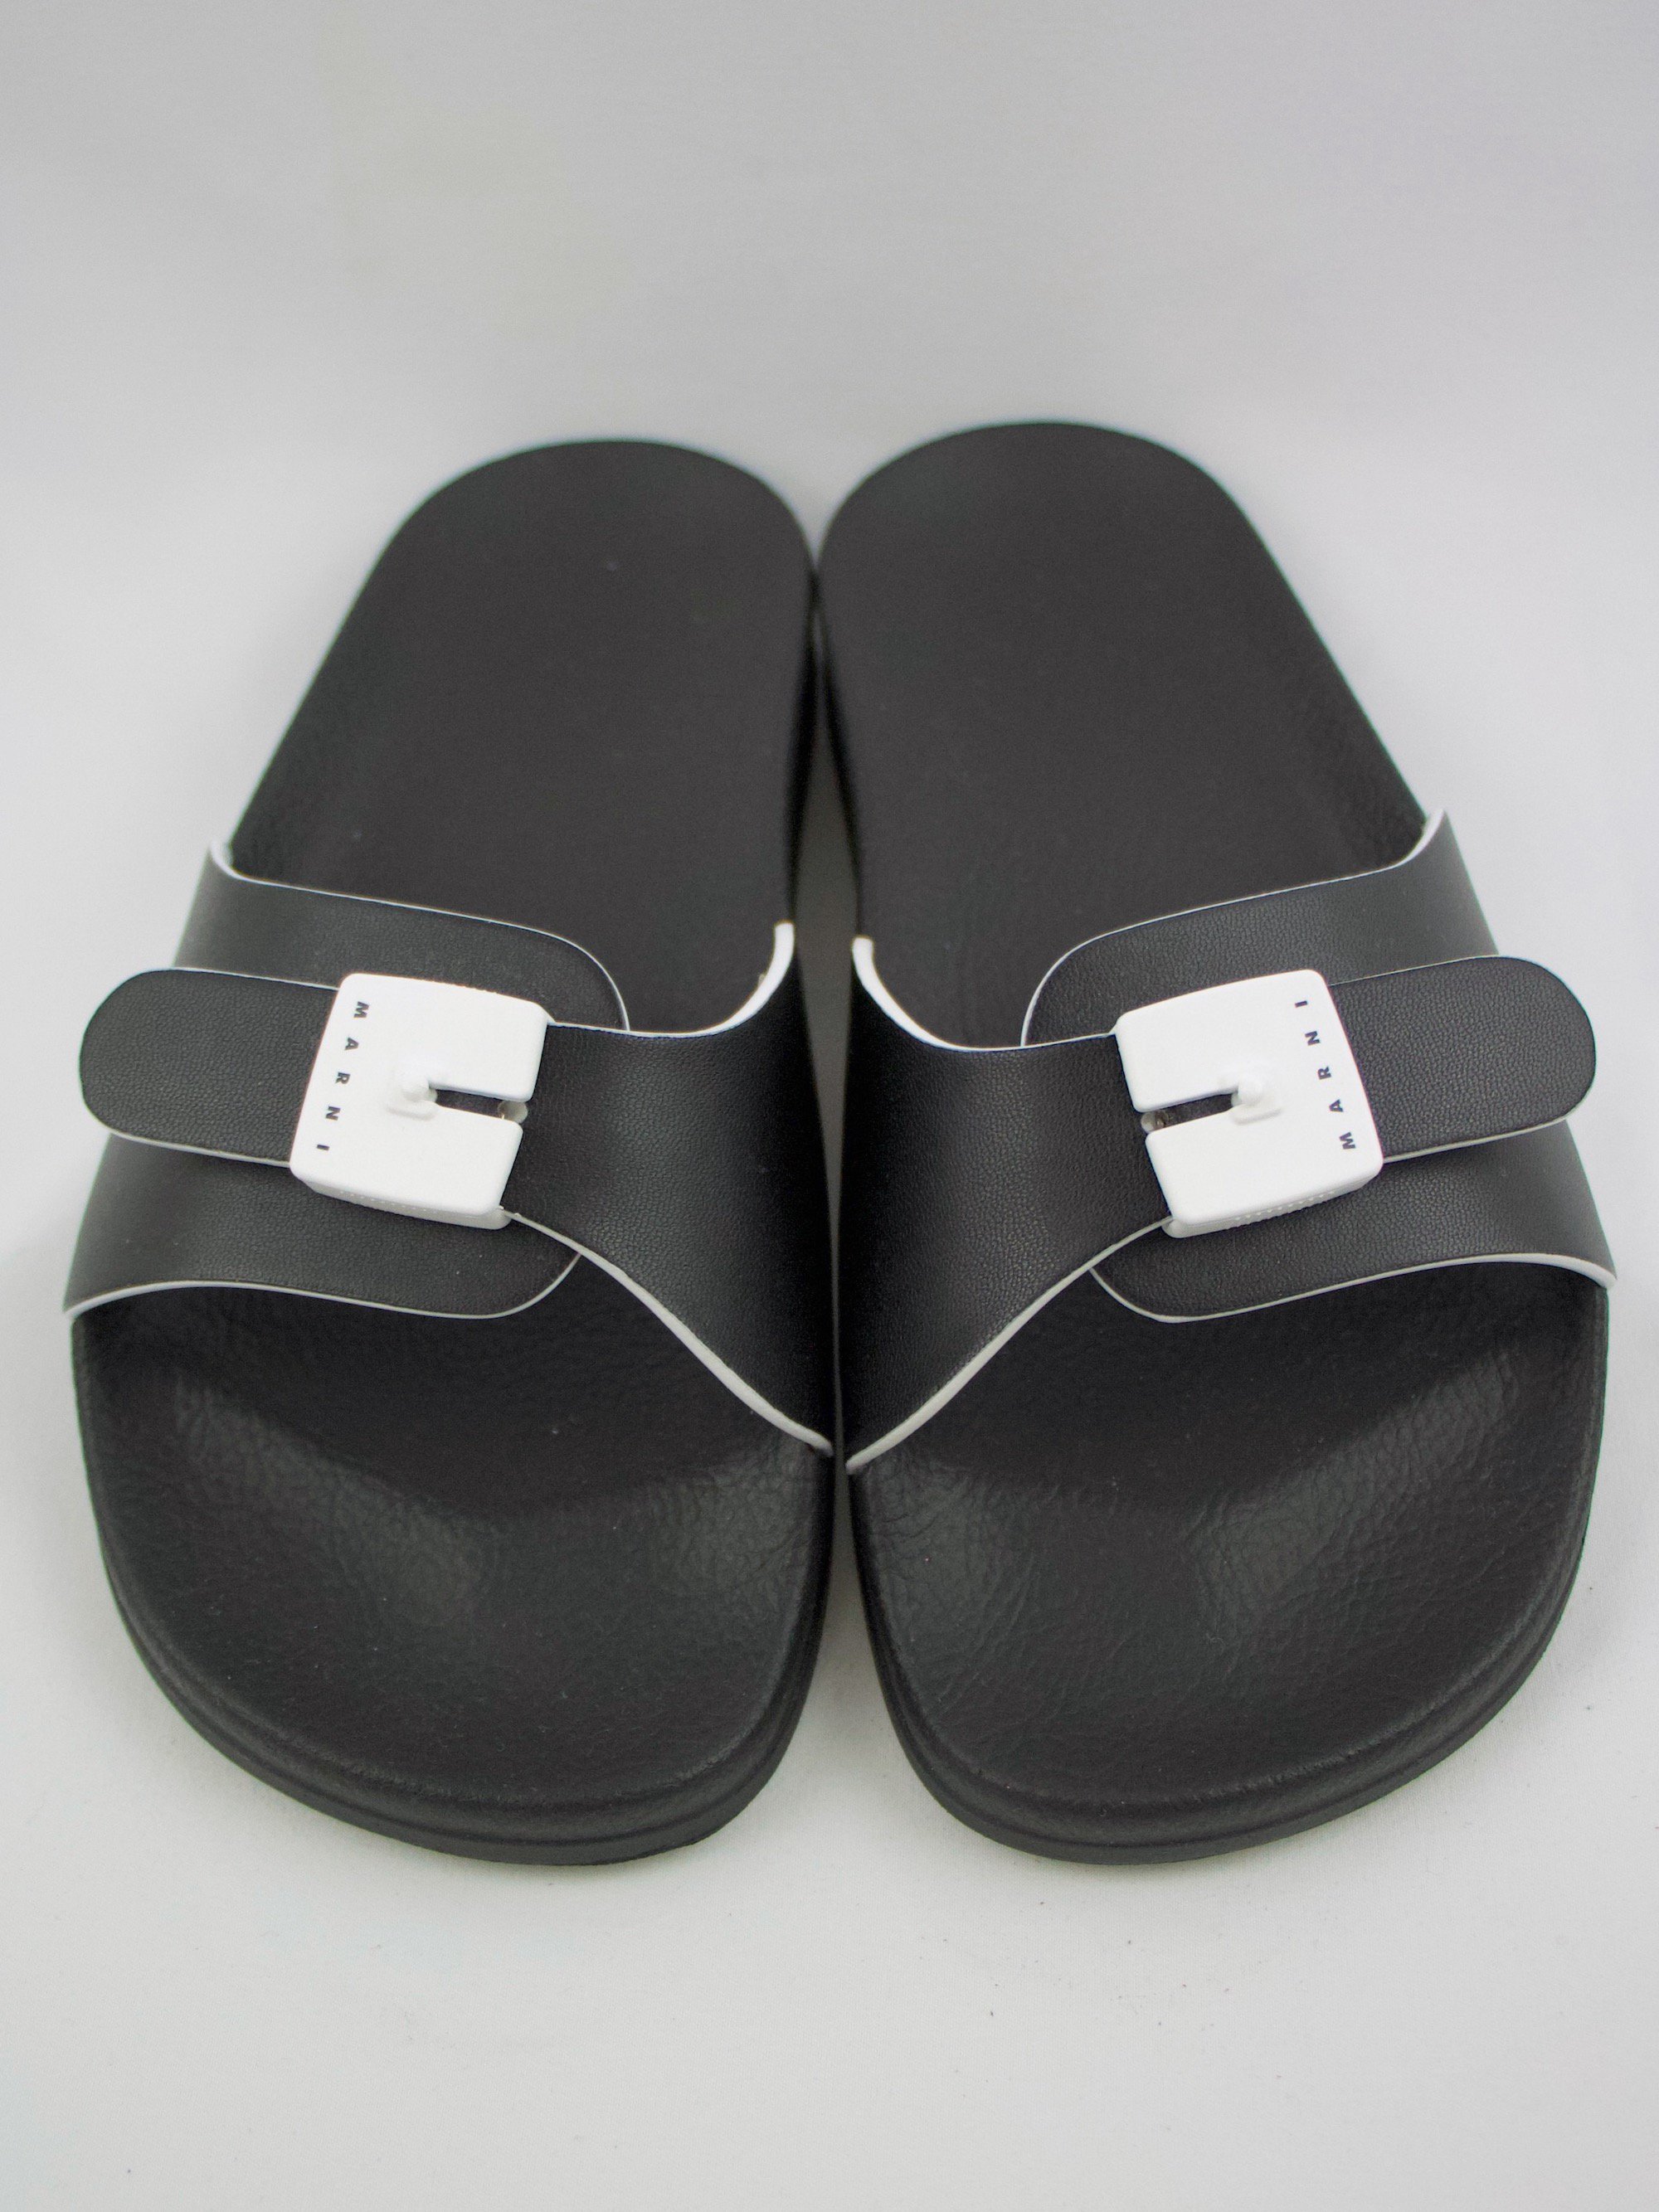 <img class='new_mark_img1' src='https://img.shop-pro.jp/img/new/icons23.gif' style='border:none;display:inline;margin:0px;padding:0px;width:auto;' />【30%OFF】MARNI Flat sandal